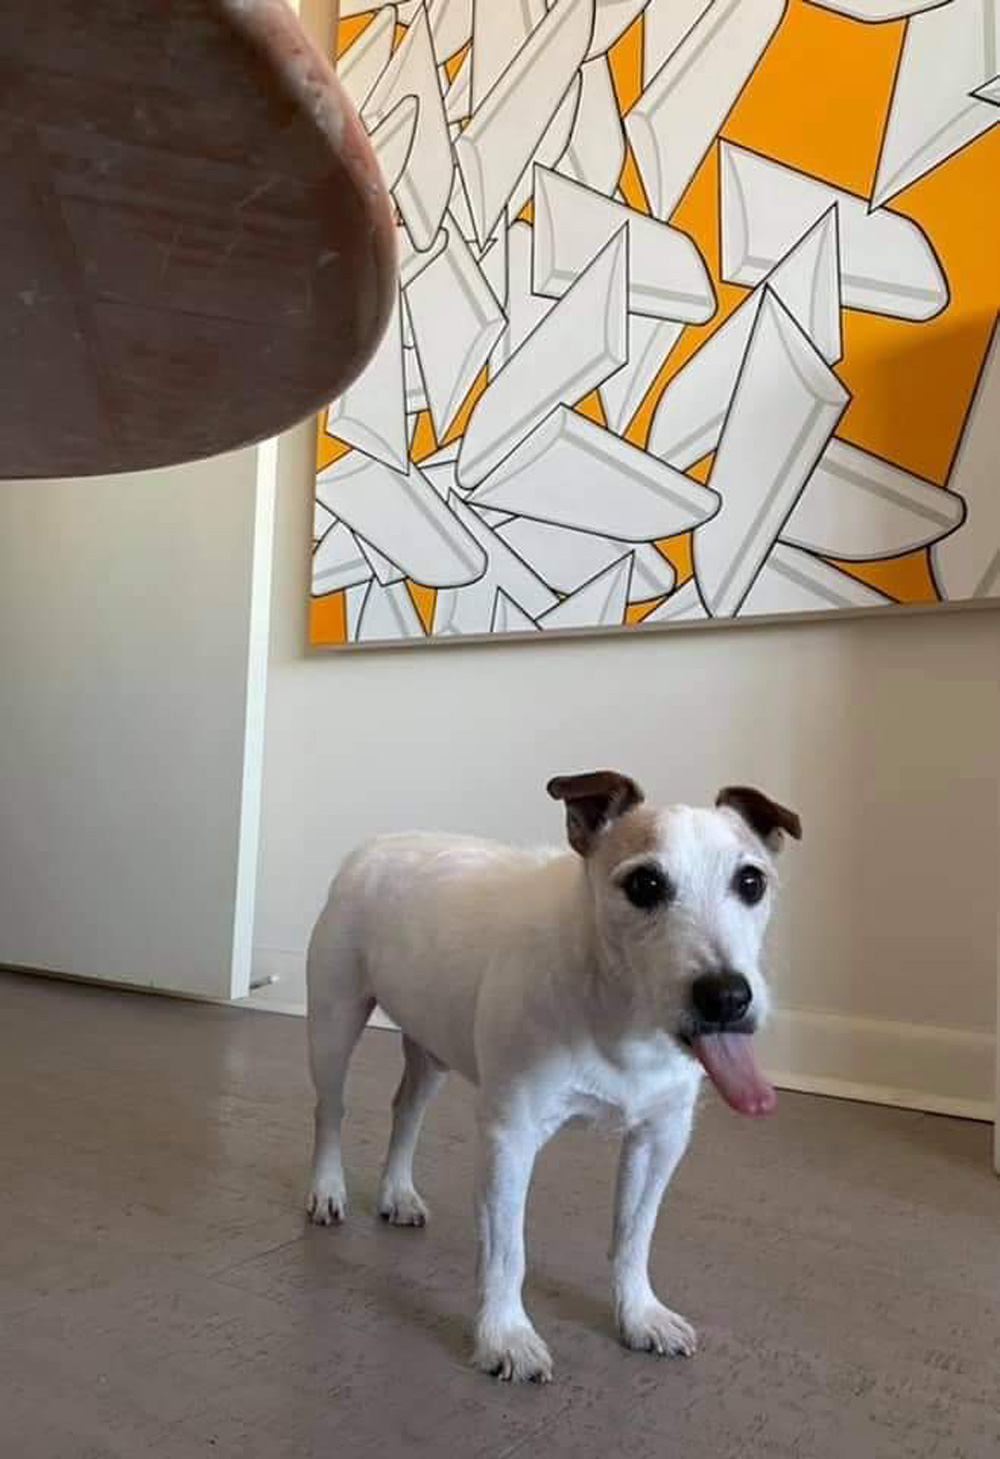 Meet Rocky. He’s Rod G. of San Antonio’s 14-year-old deaf rescued Jack Russell. Rod says he’s a happy little guy, and they have helped each other through some tough times.